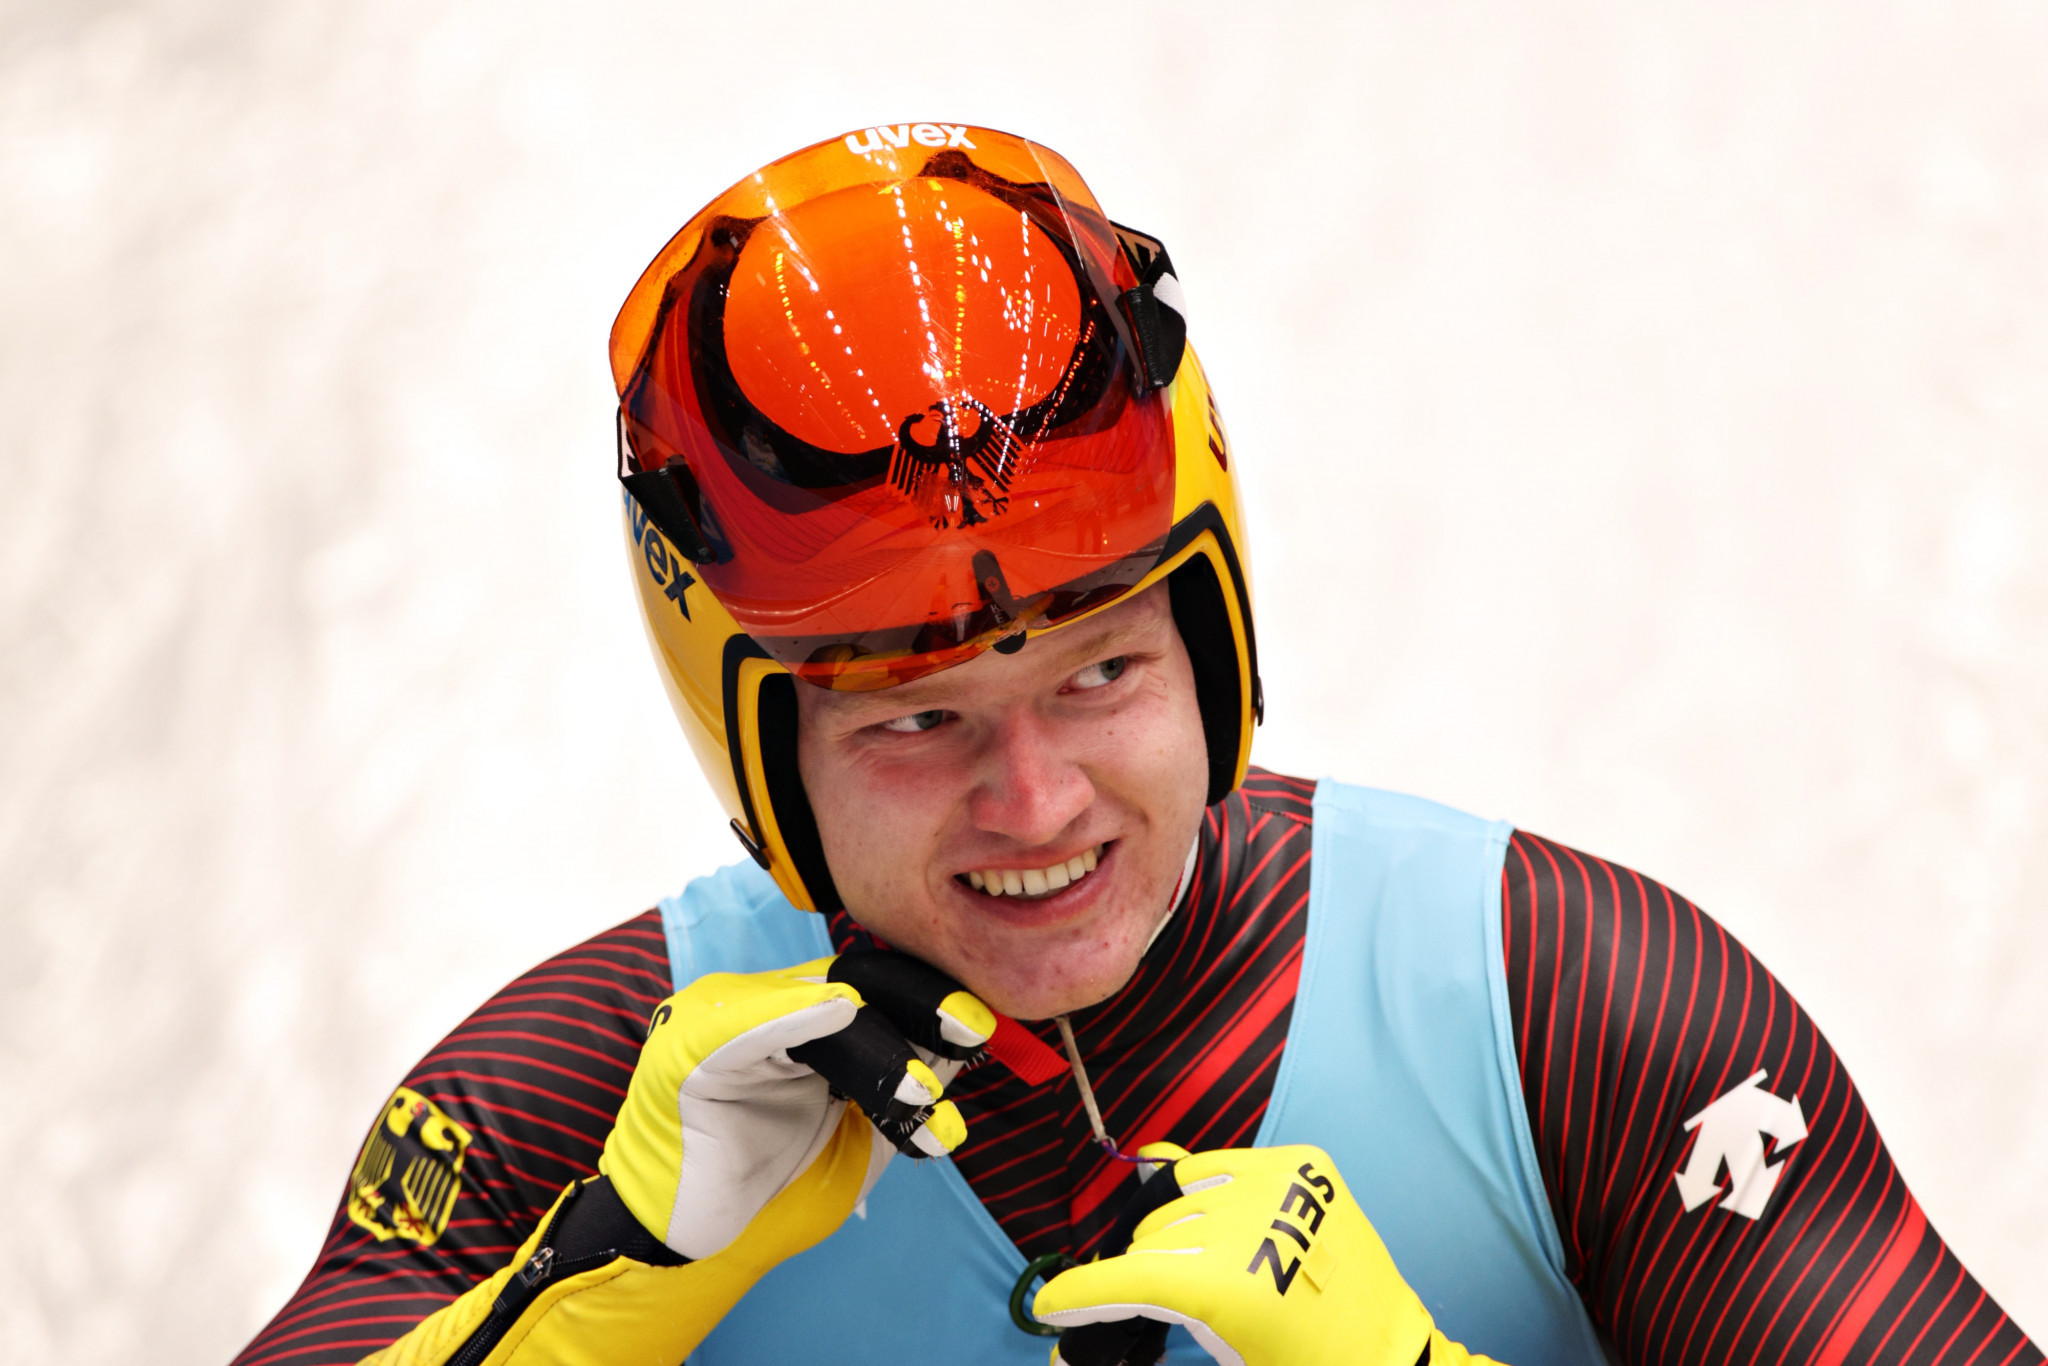 Max Langenhan of Germany claimed a fourth consecutive men's singles Luge World Cup win ©Getty Images